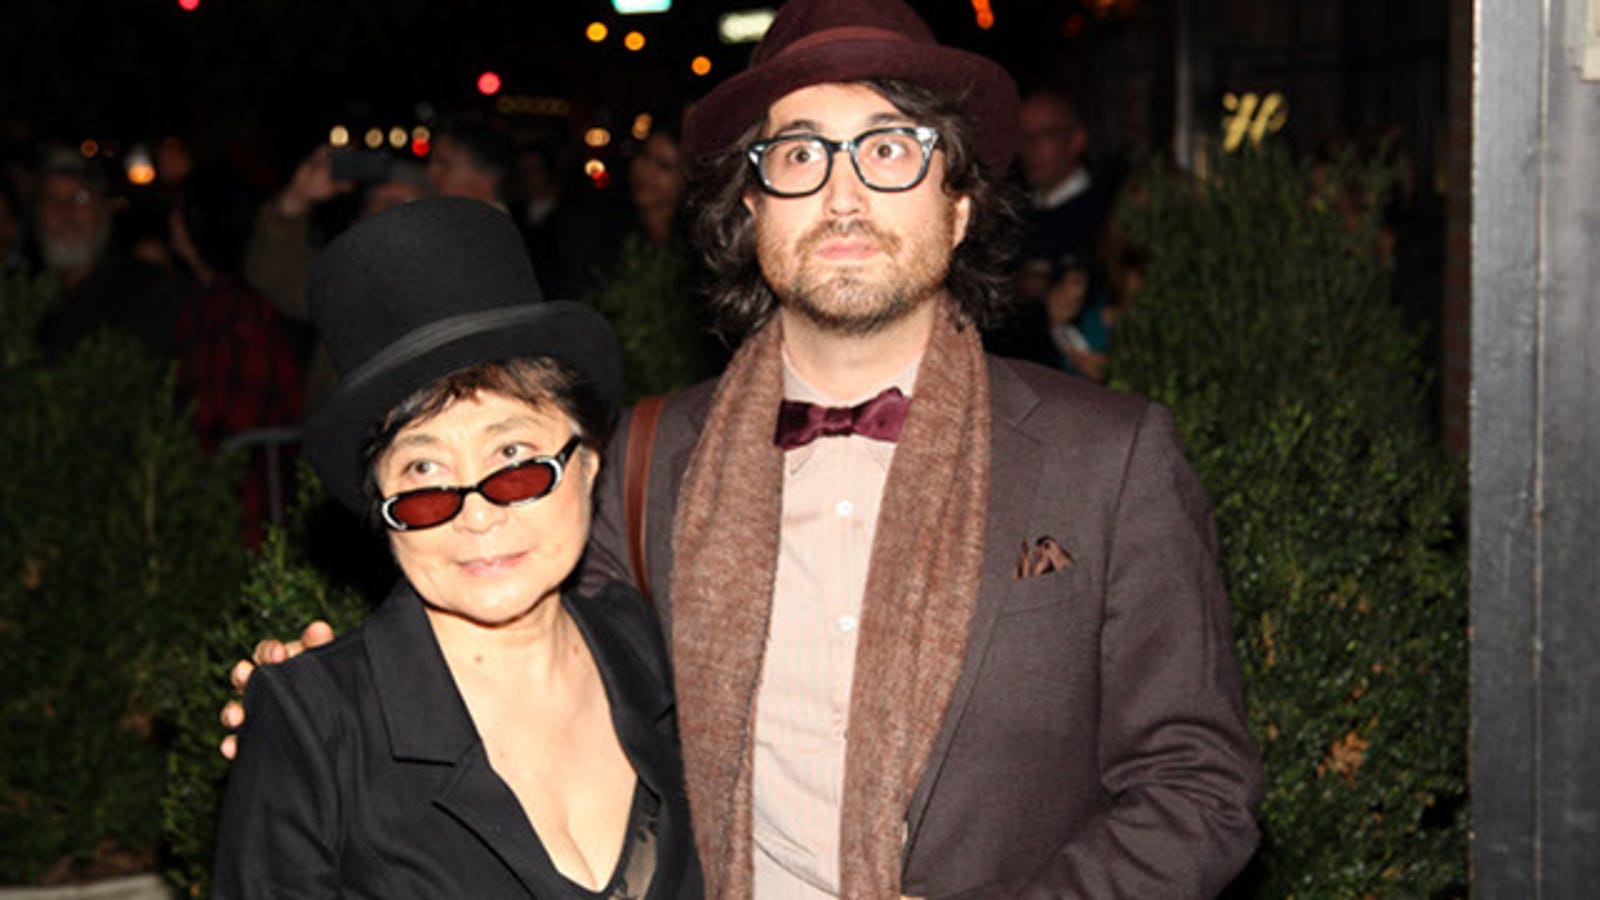 Sean Lennon And Yoko Ono Make It Difficult To Tell Which One’s Younger